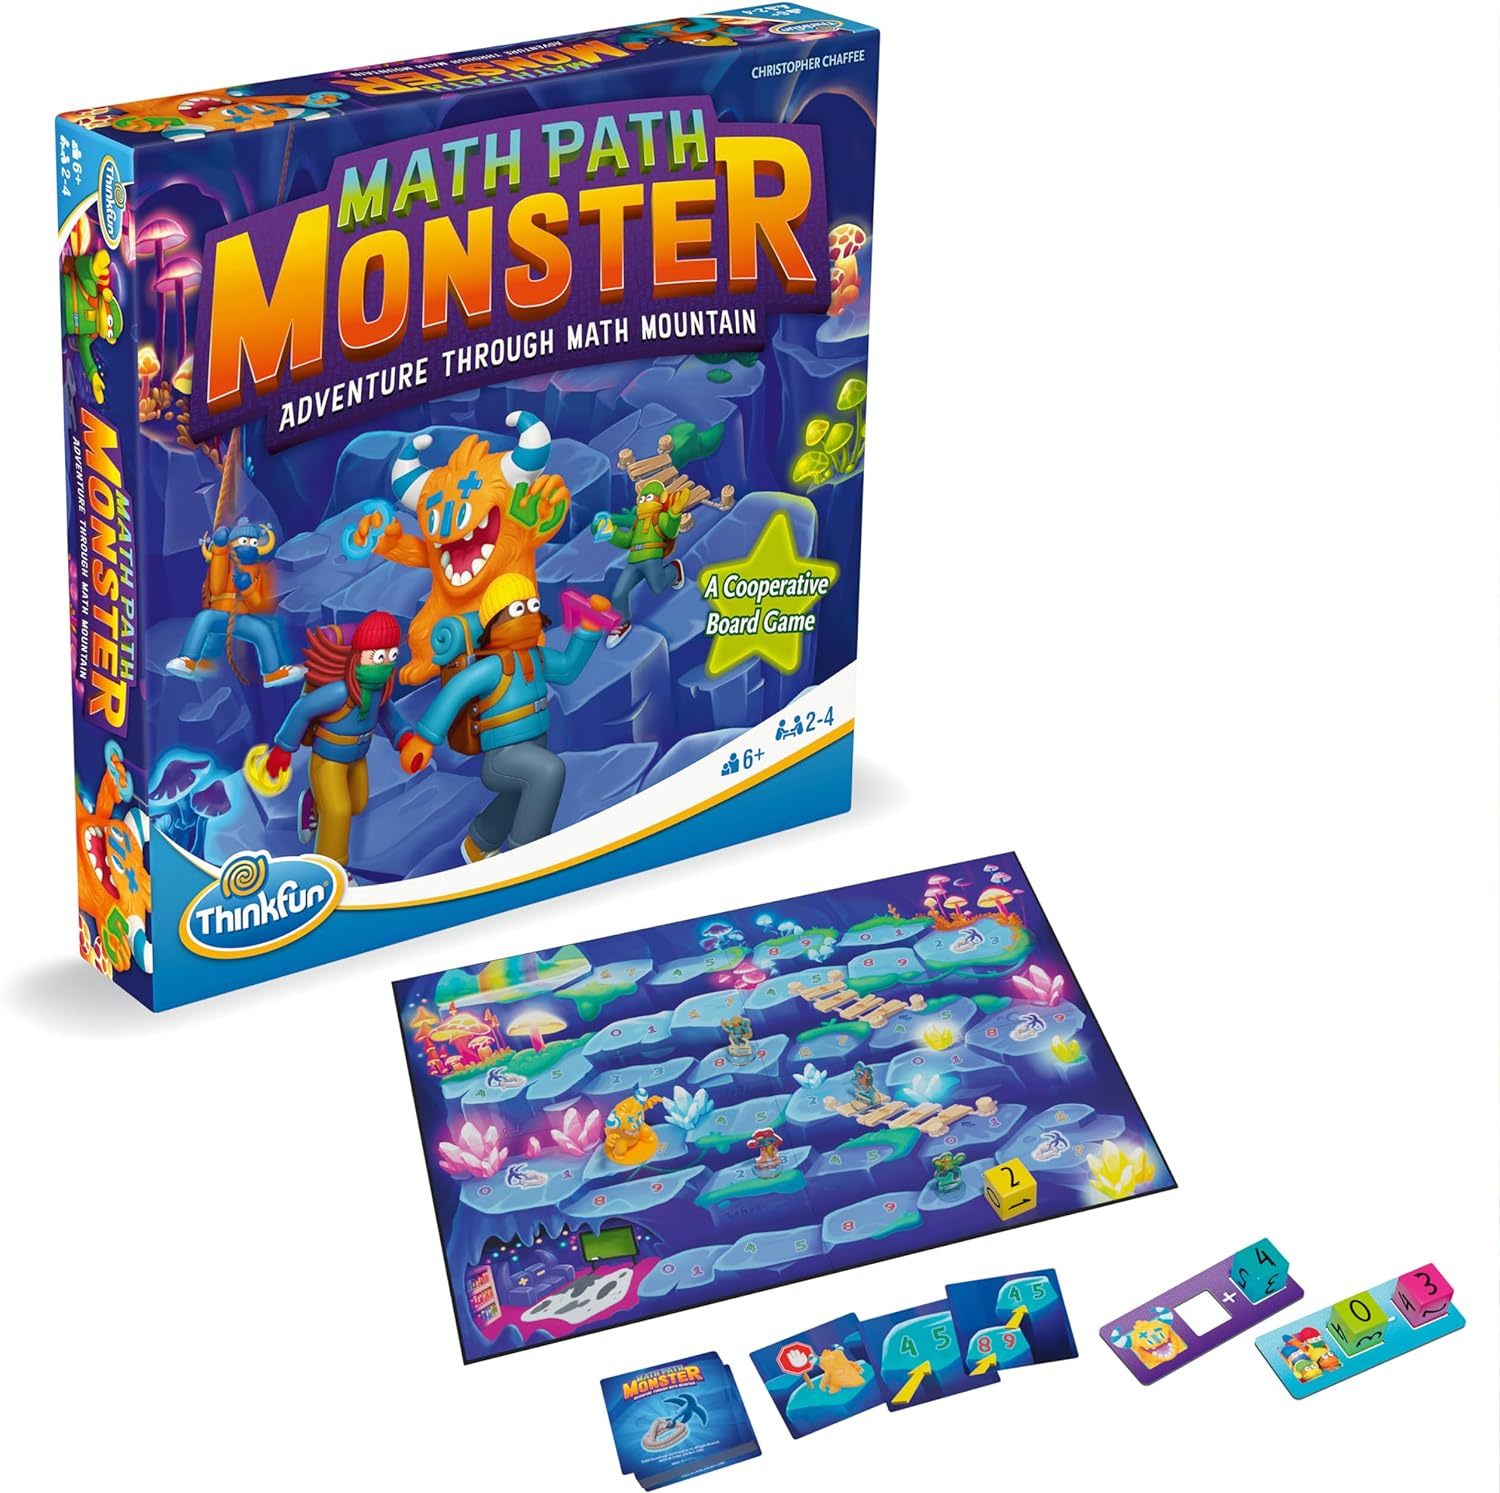 Math Path Monster The Cooperative Board Game Using Math and Fun to Win - $46.65